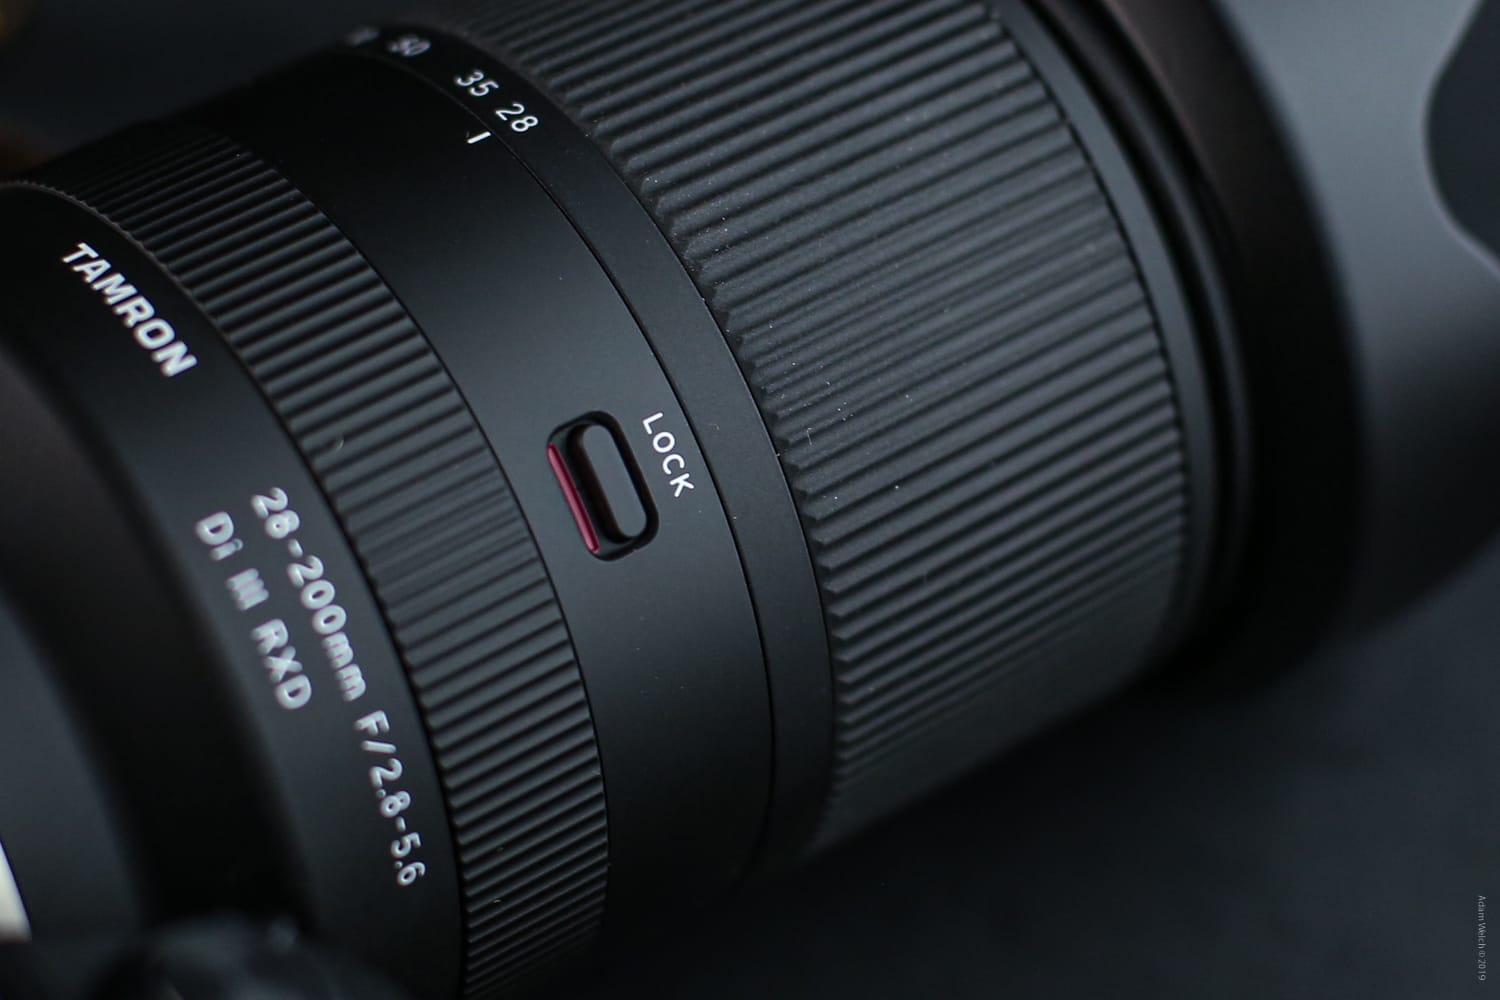 Detailed Review of the Tamron 28-200mm f/2.8-5.6 Di III RXD Full-Frame E-Mount Lens